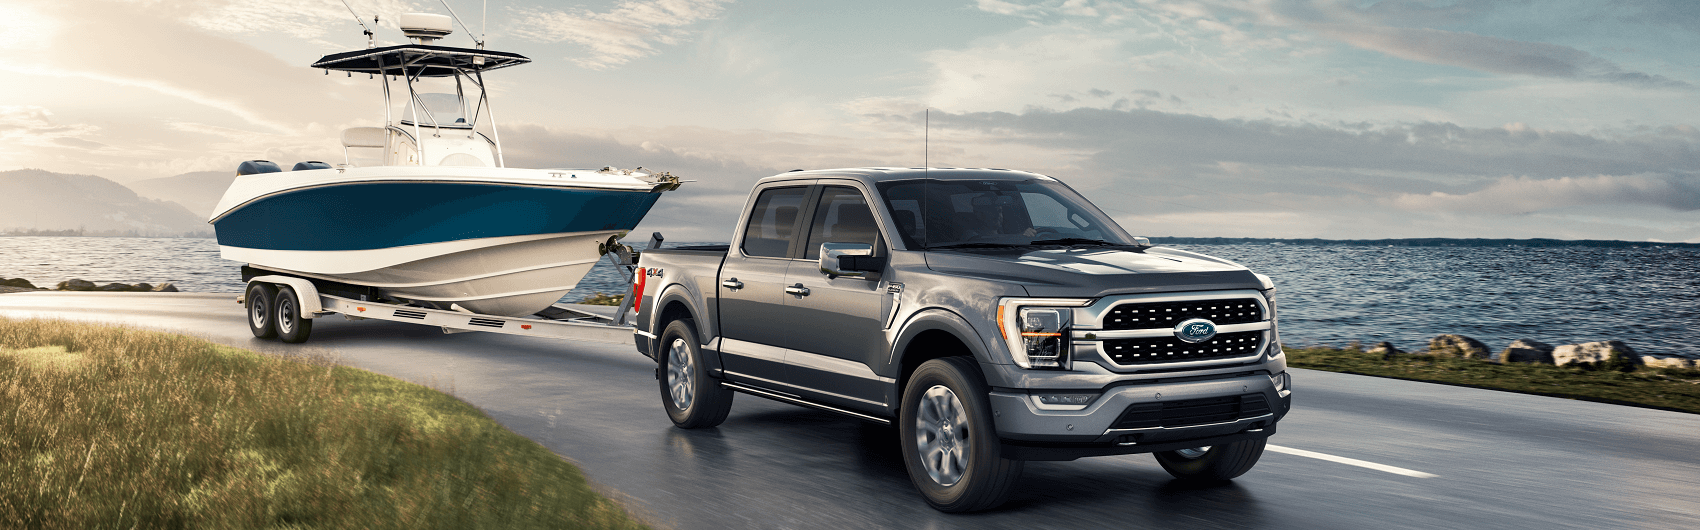 With a towing capacity of 14,000 pounds, a silver Ford F-150 easily tows a boat on a seaside road